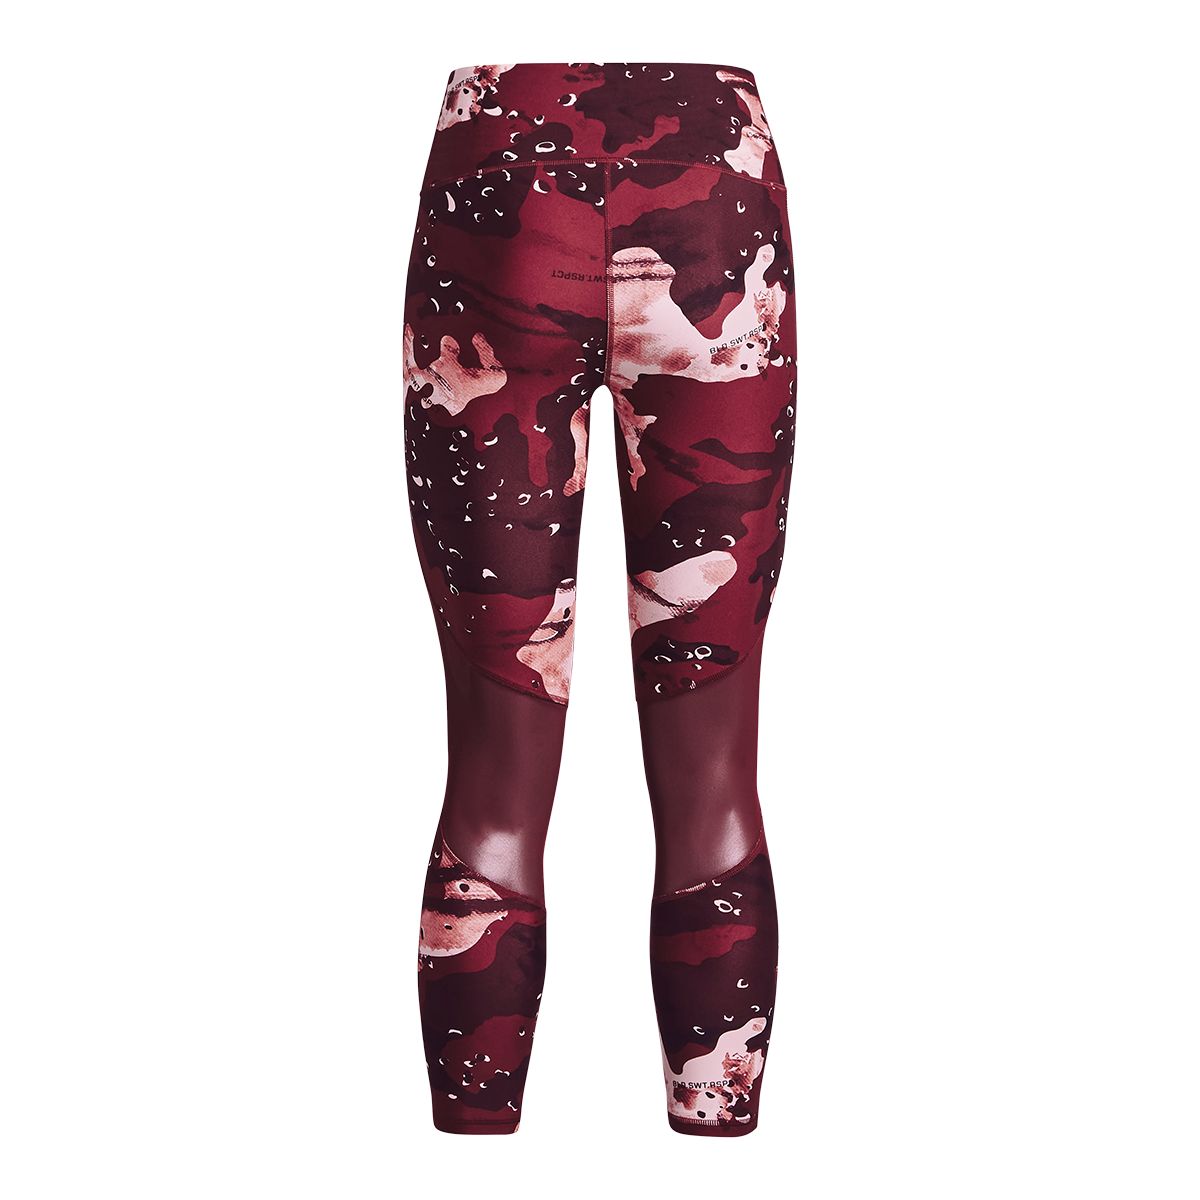 Under Armour Women's Project Rock Printed 7/8 Tights